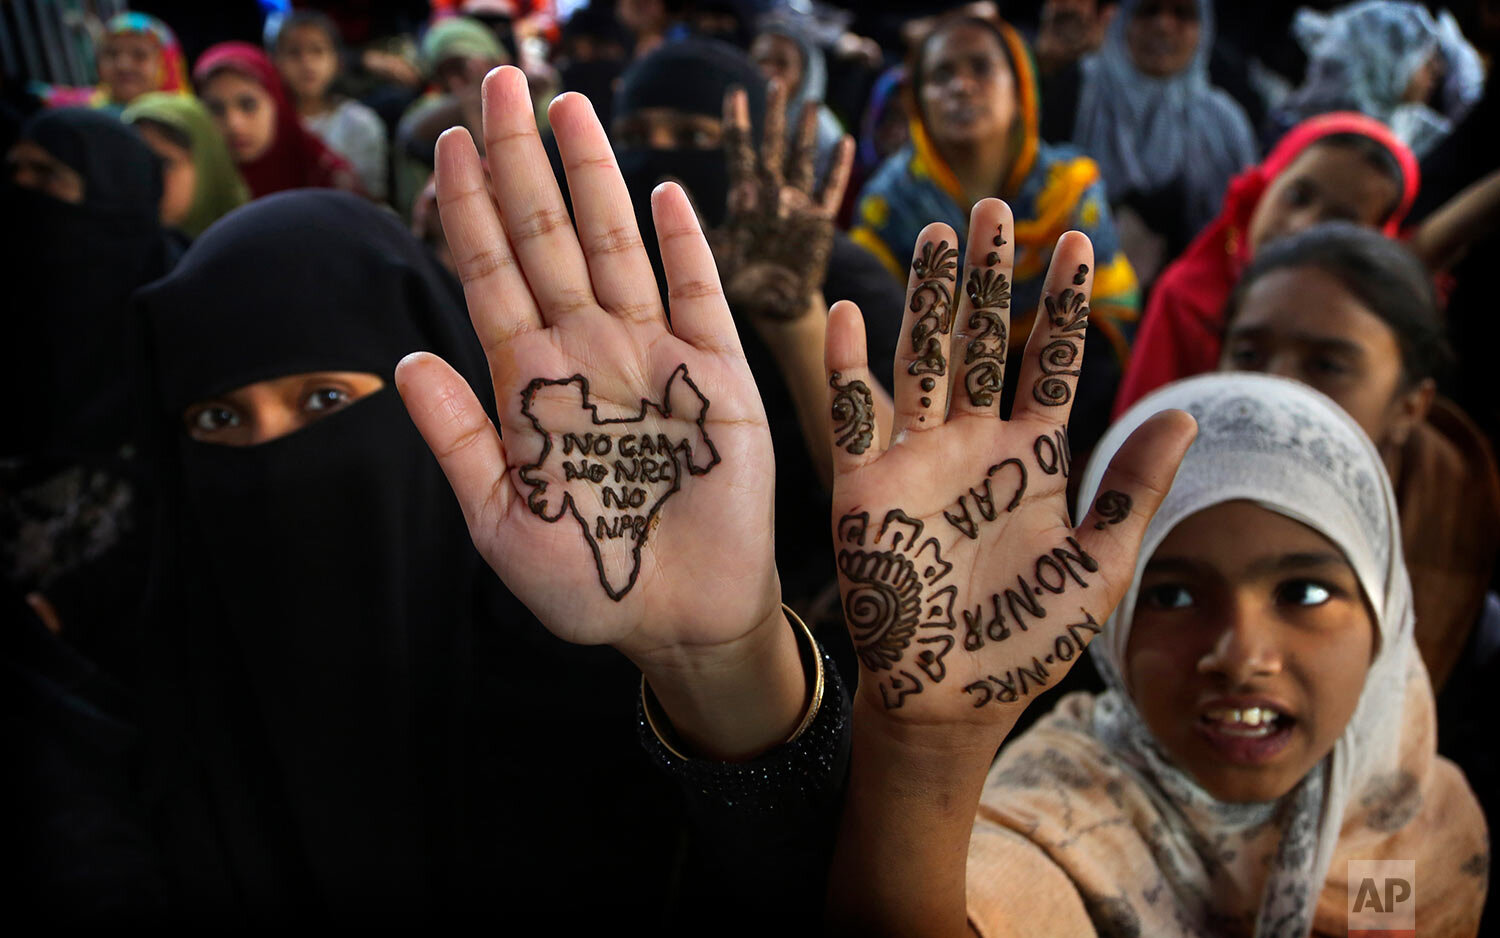  Indian women and children display slogans written with henna on their palms during a protest against a new citizenship law in Bangalore, India, Sunday, March 1, 2020. (AP Photo/Aijaz Rahi) 